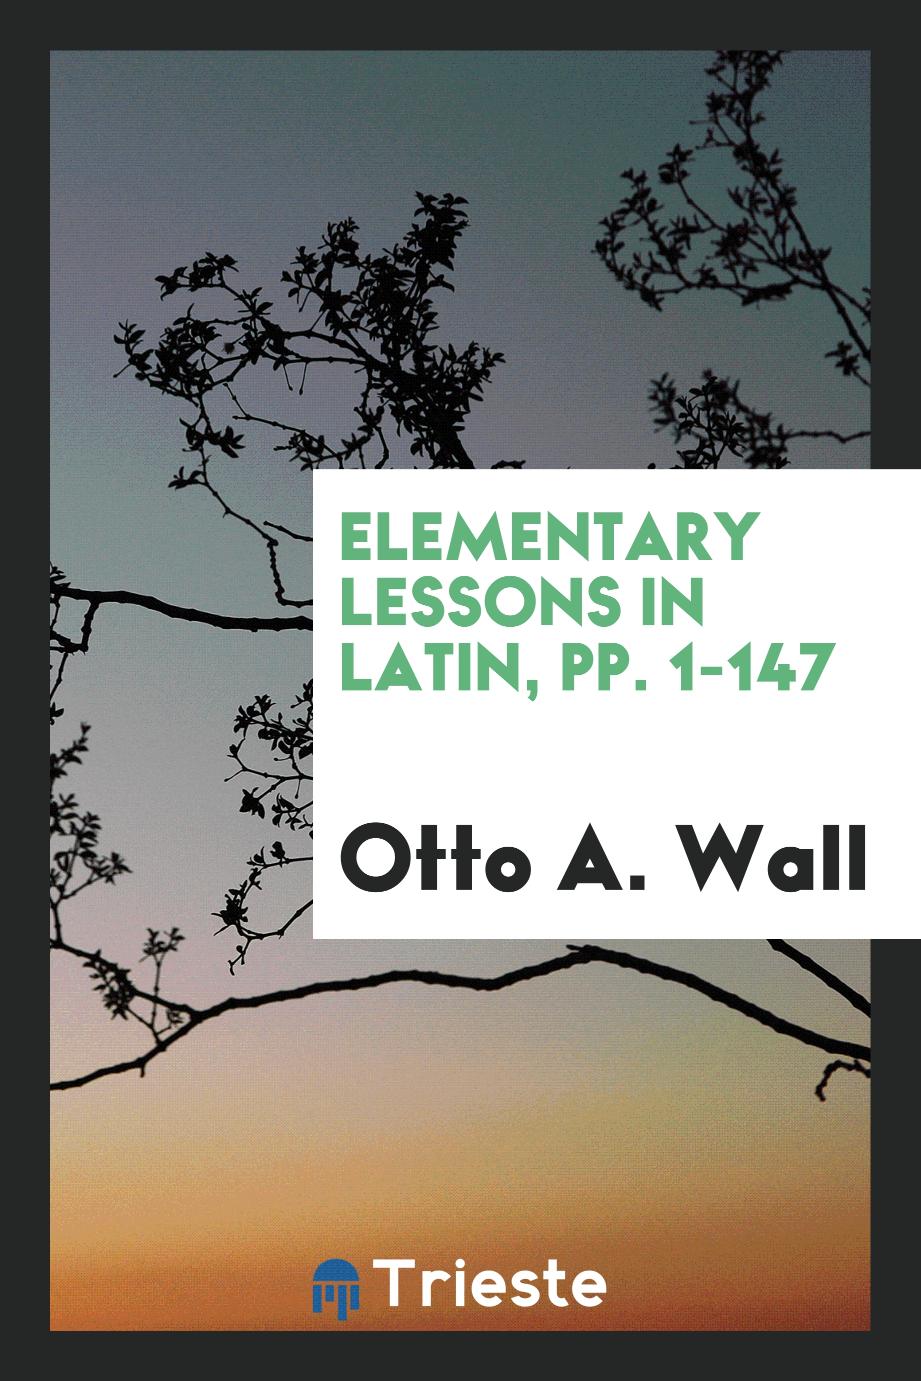 Elementary Lessons in Latin, pp. 1-147